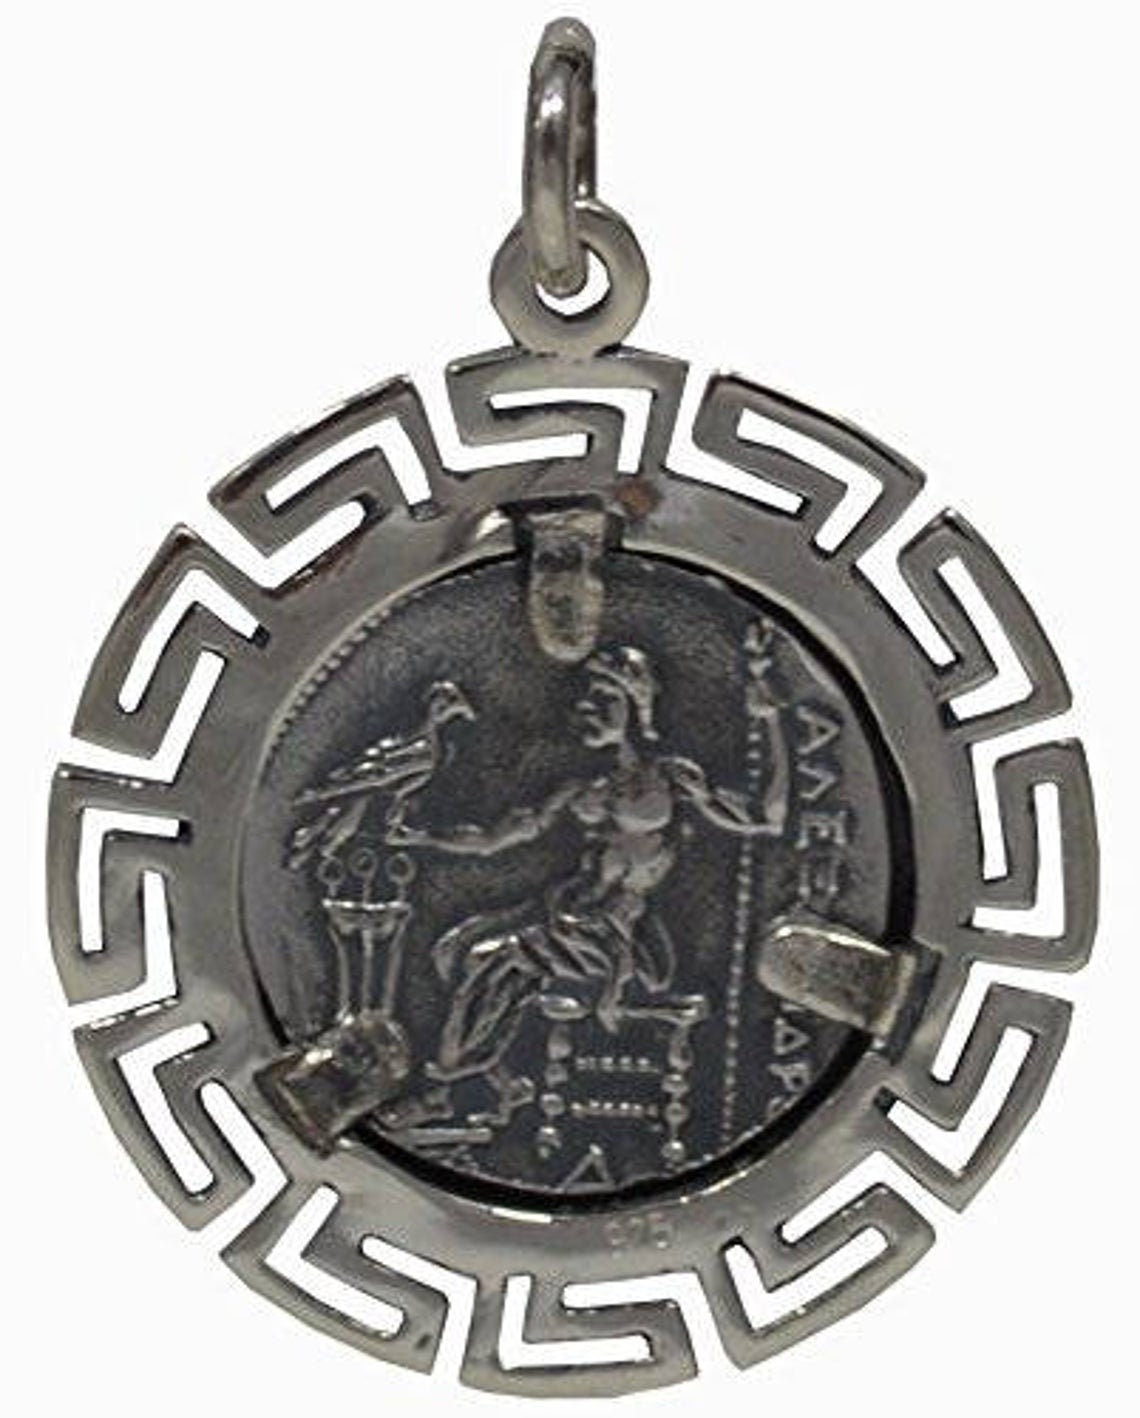 Alexander The Great - Macedonian King - Meander Motif - Amphipolis Tetradrachm - 336-326 BC - Coin Pendant - 925 Sterling Silver